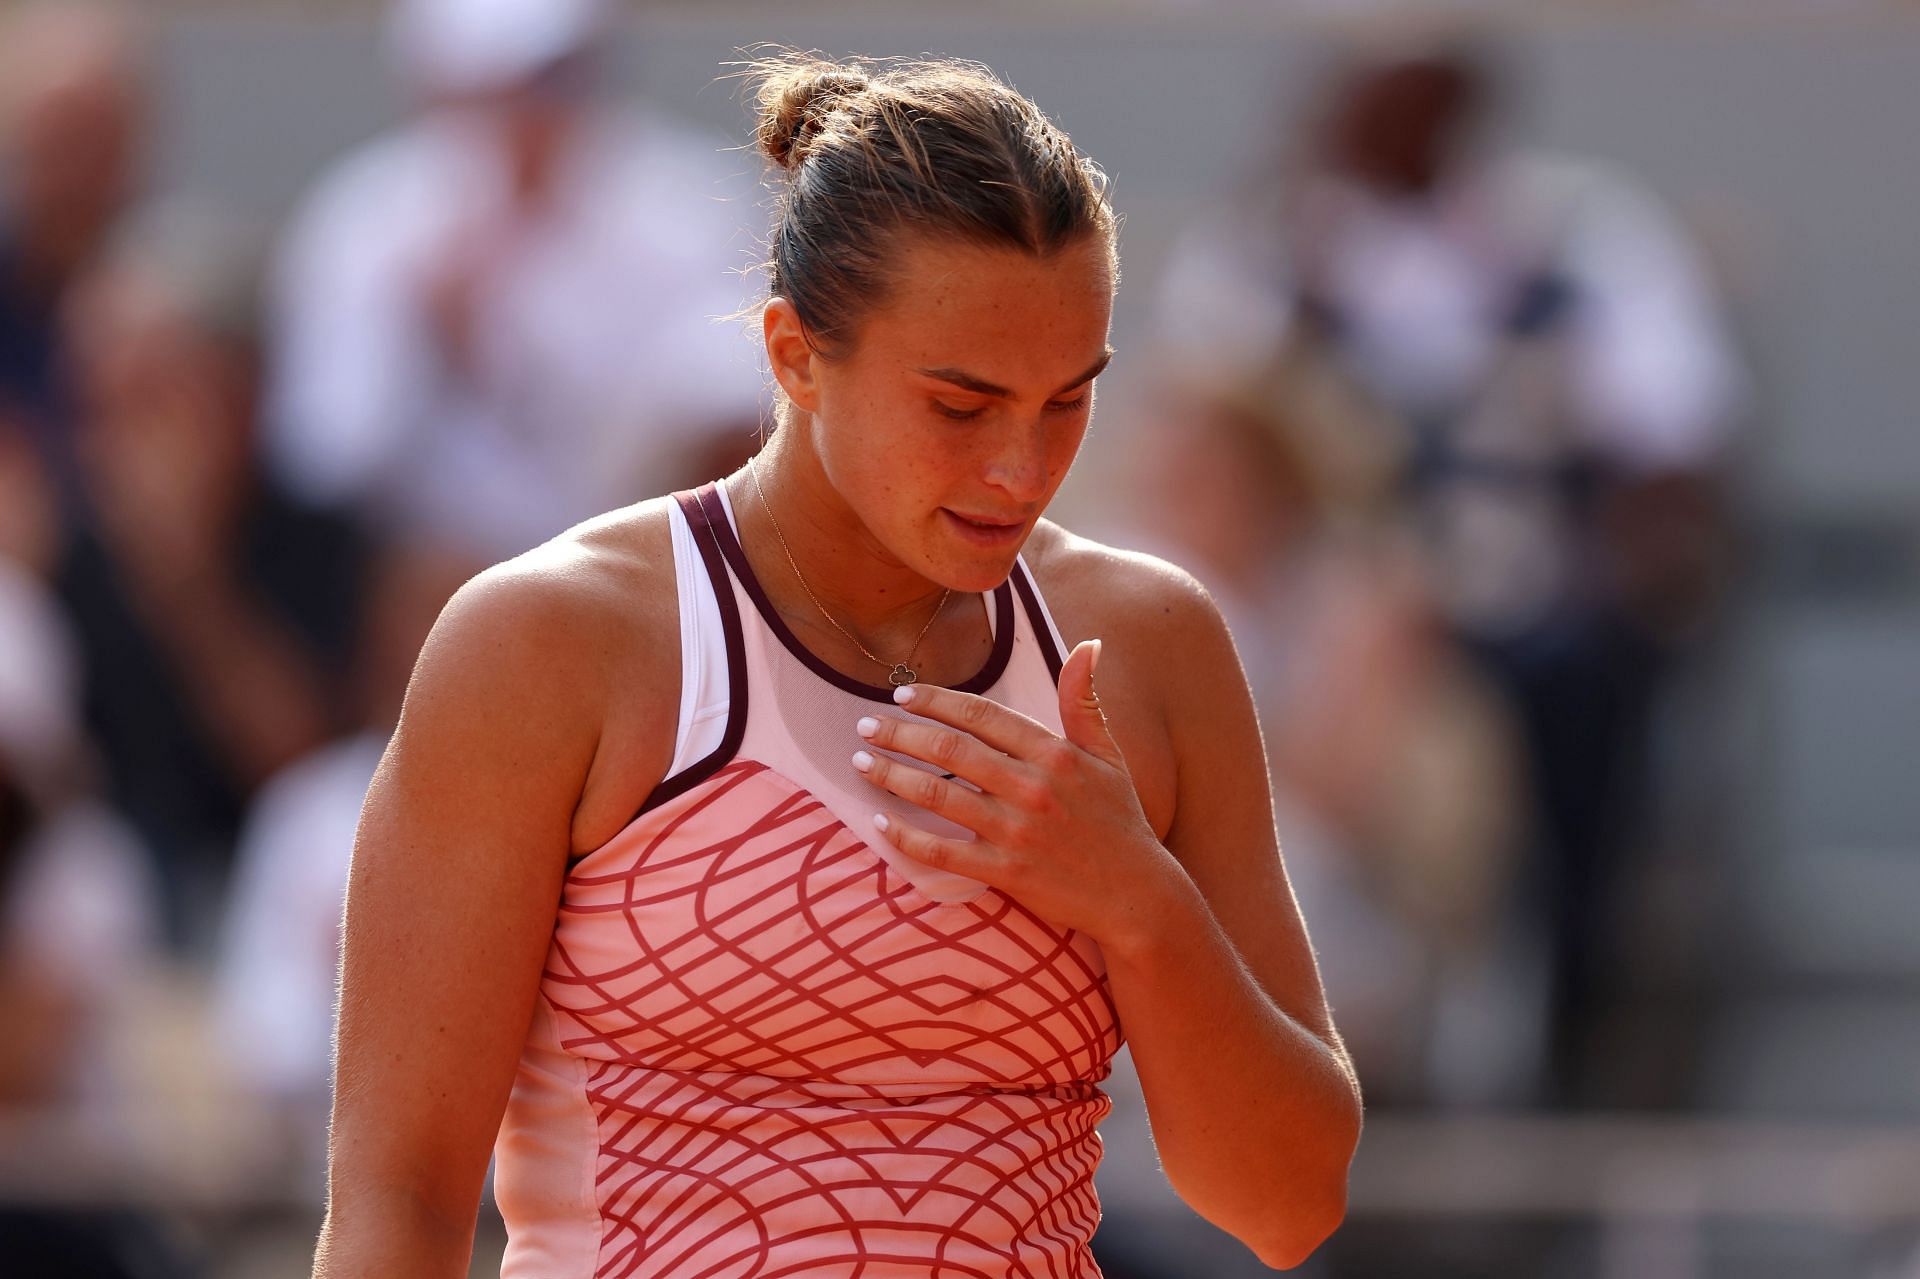 Sabalenka lost in the semifinals of French Open last year